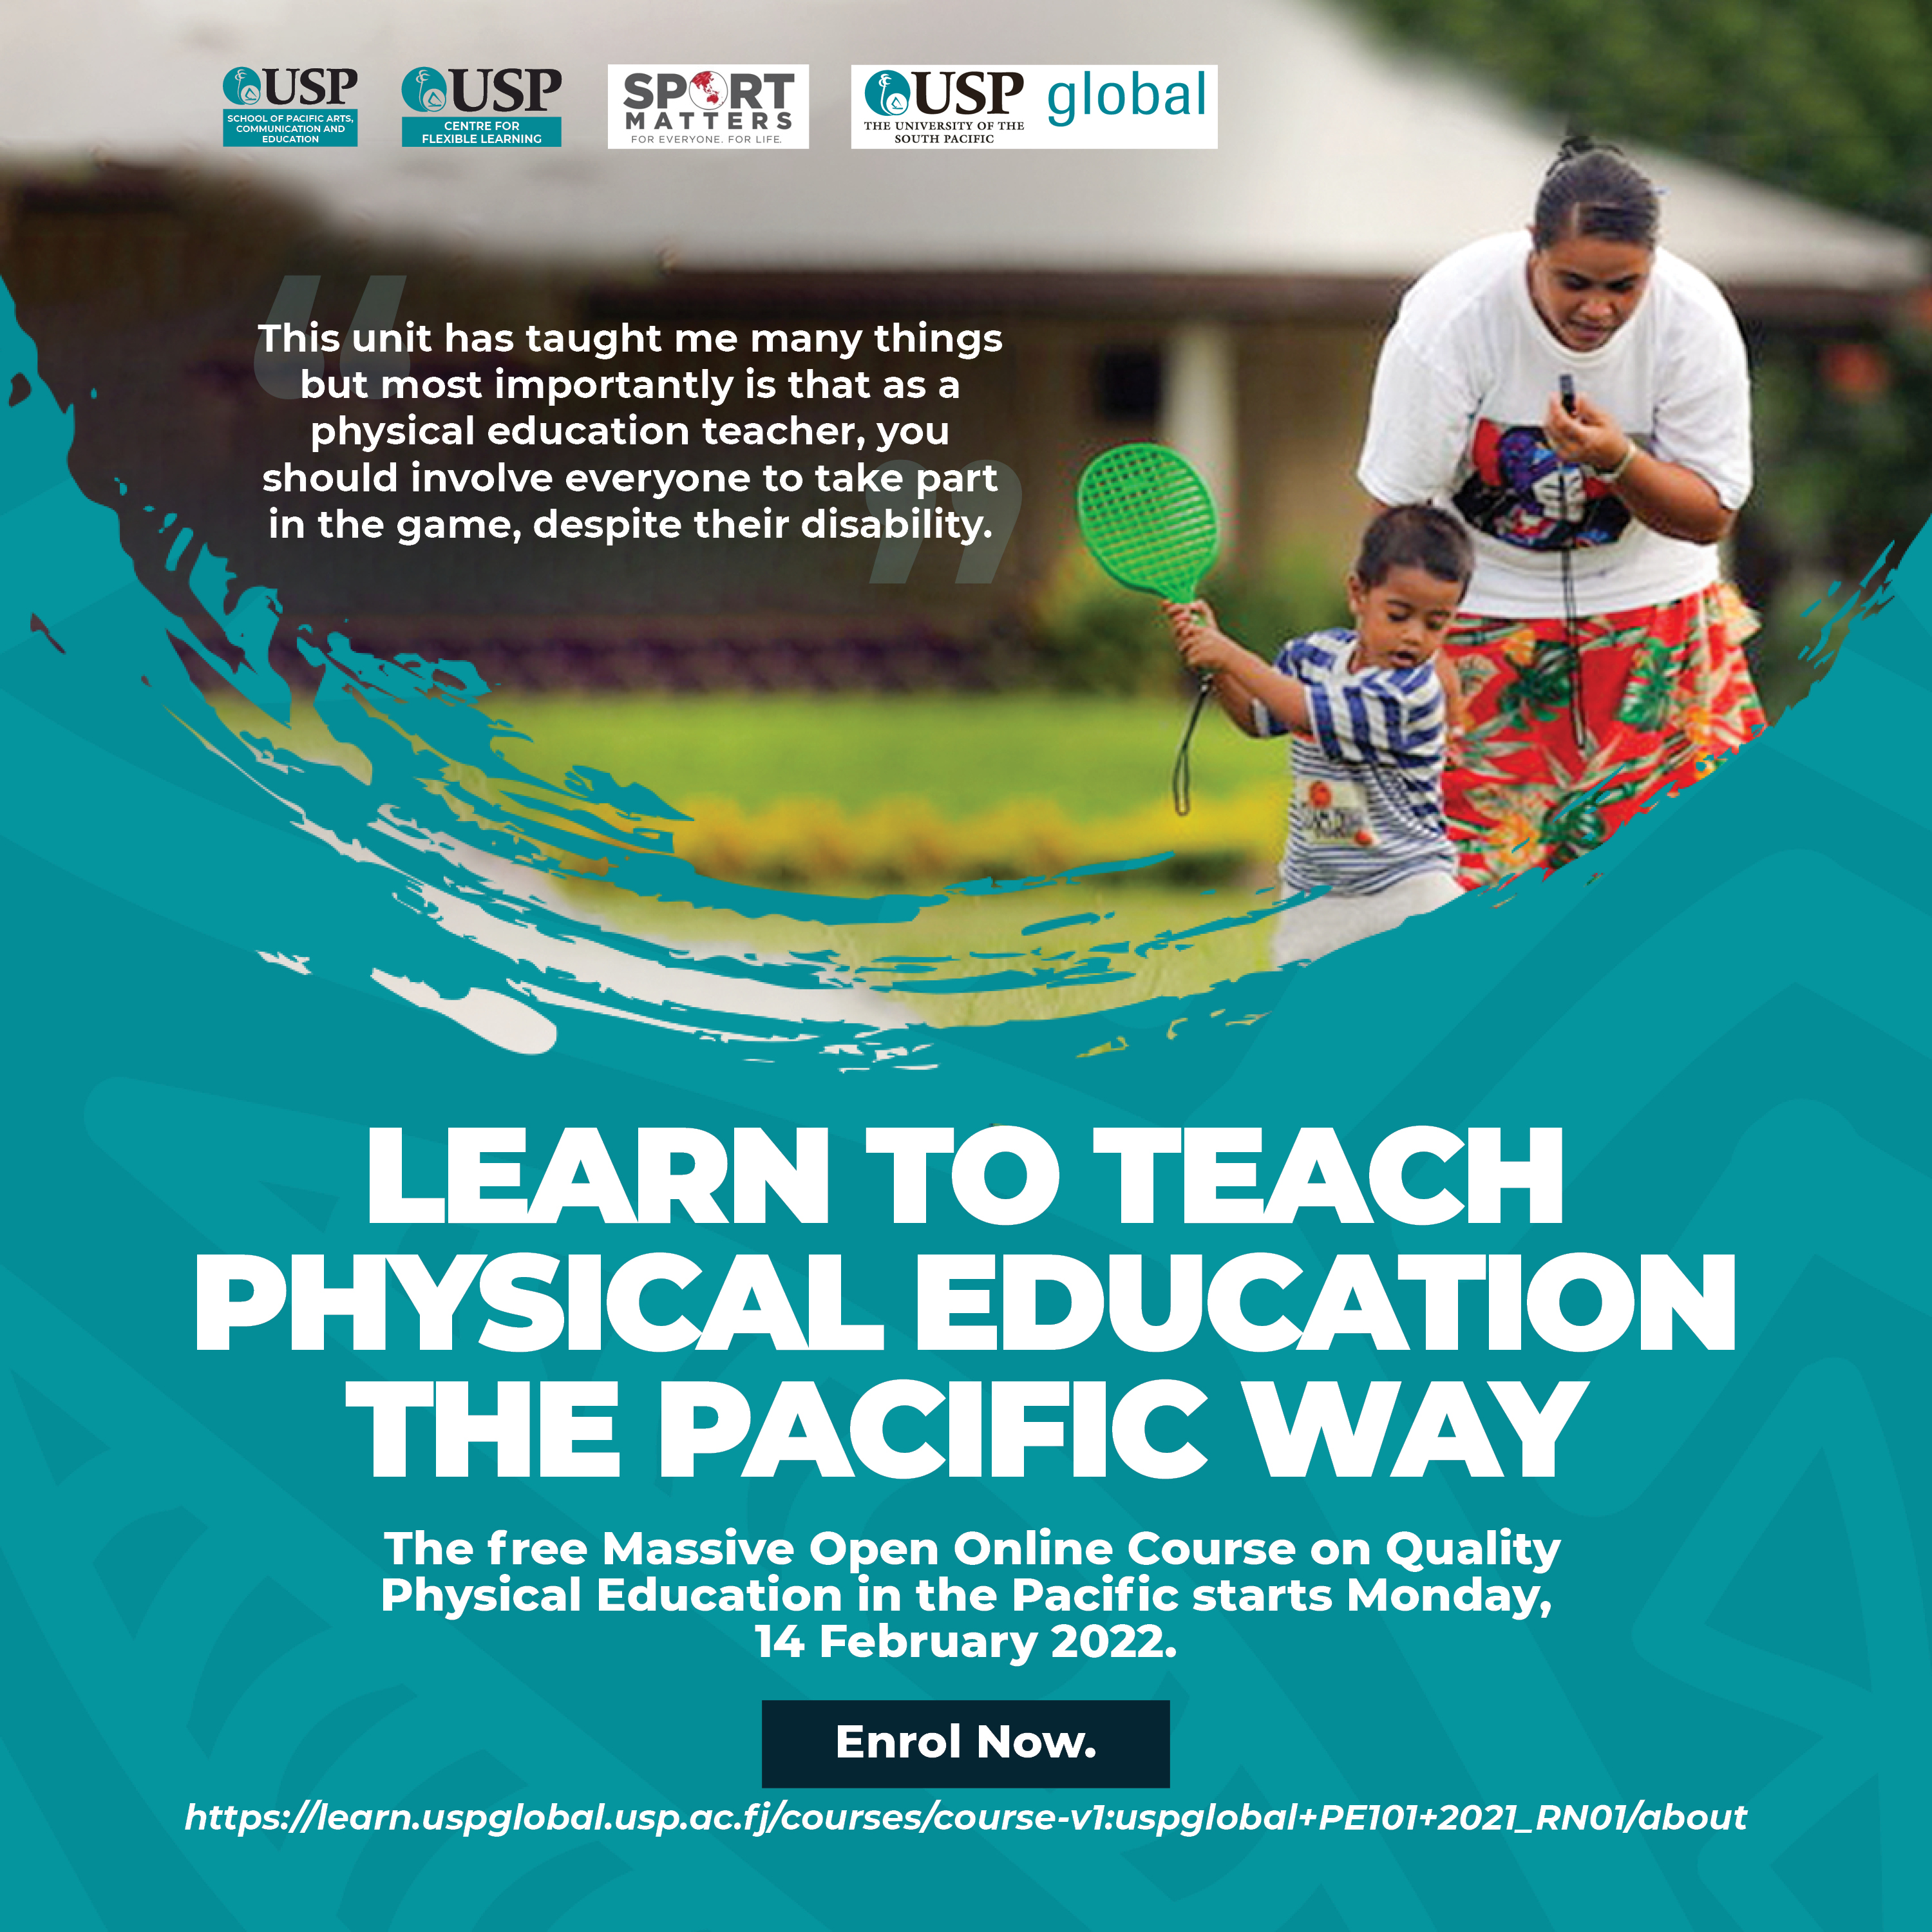 Quality Physical Education in the Pacific